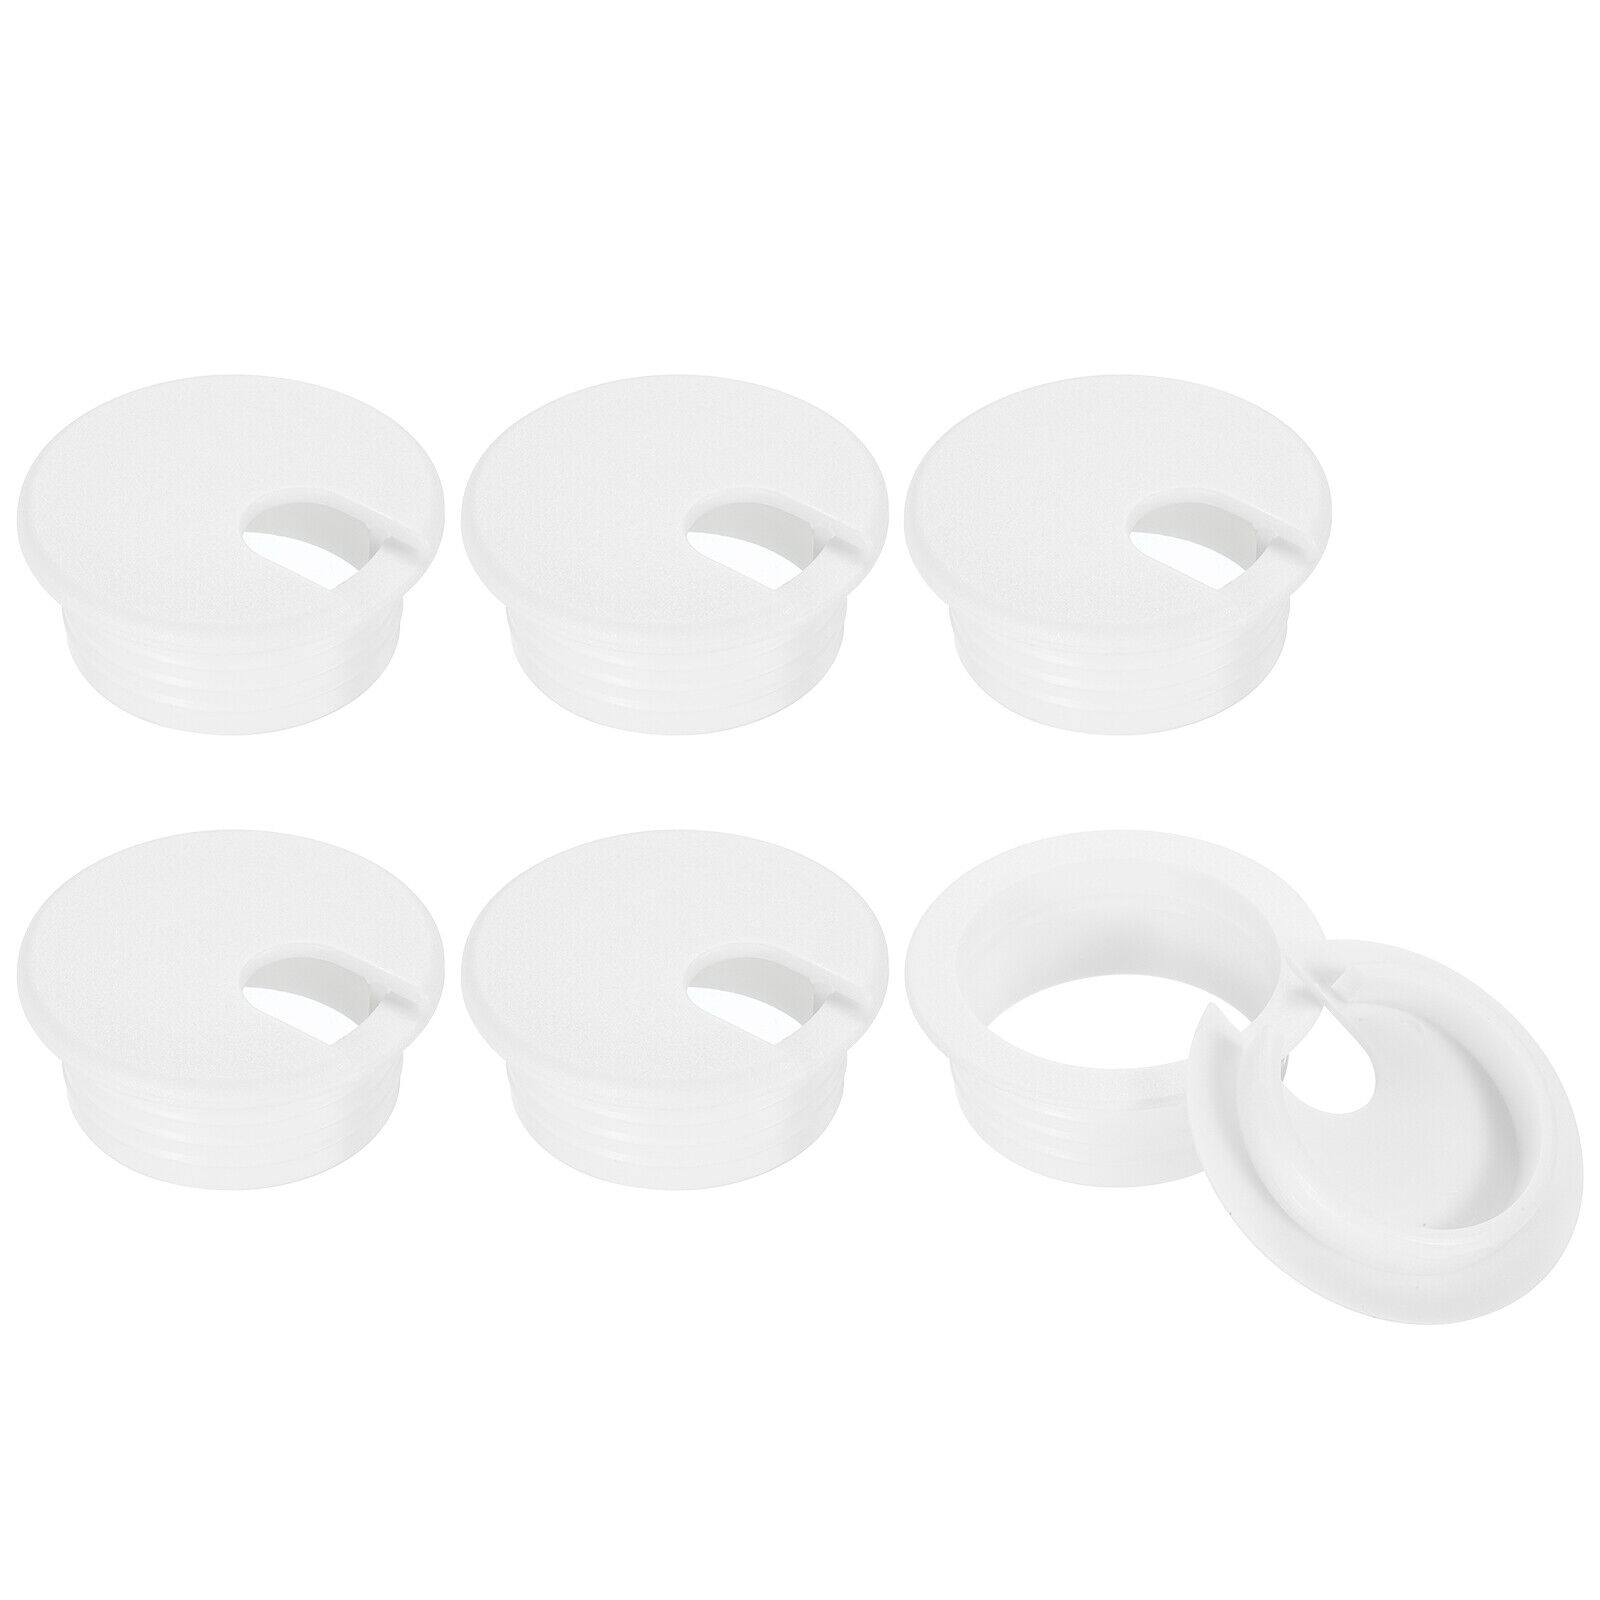 6Pcs 38mm Cable Hole Cover ABS Desk Cable Wire Cord Grommet for Wire, White